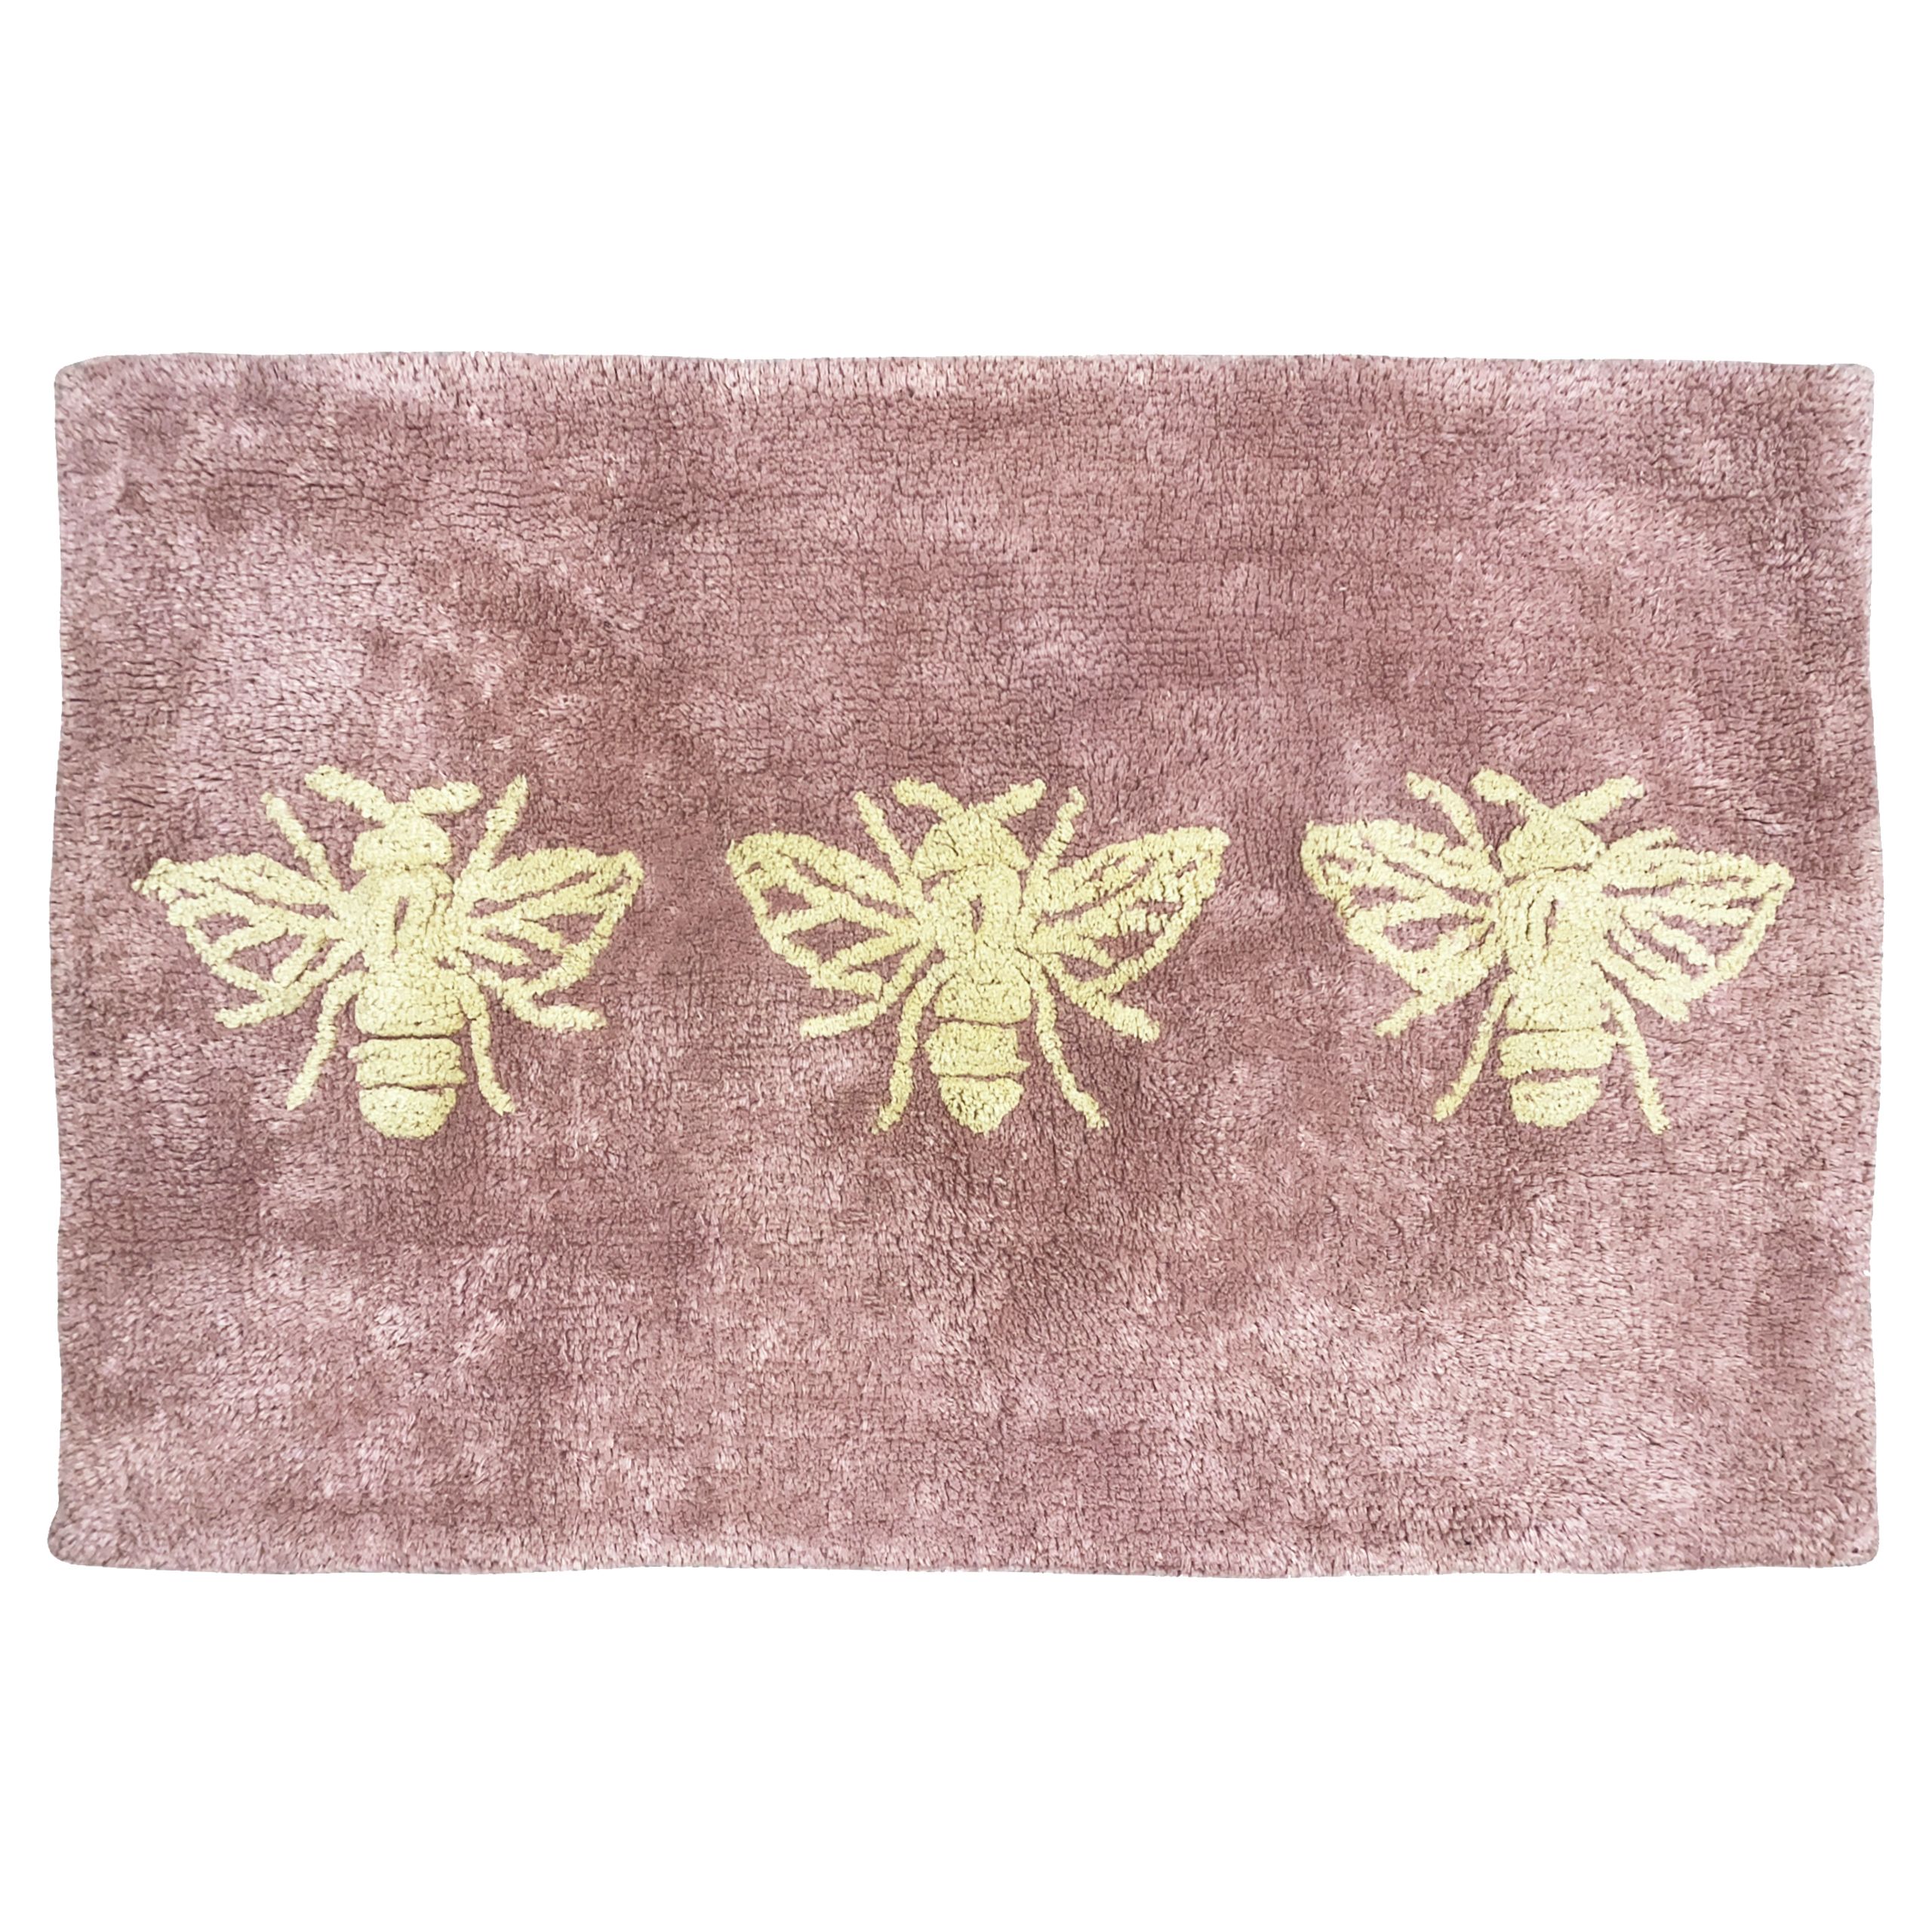 Featuring a tufted Bumblebee design on a blush pink cotton fabric. Made from 100% Cotton, making this bath mat incredibly soft under foot. This bath mat has an anti-slip quality, keeping it securely in place on your bathroom floor. The 1800 GSM ensures this bath mat is super absorbent preventing post-bath or shower puddles.